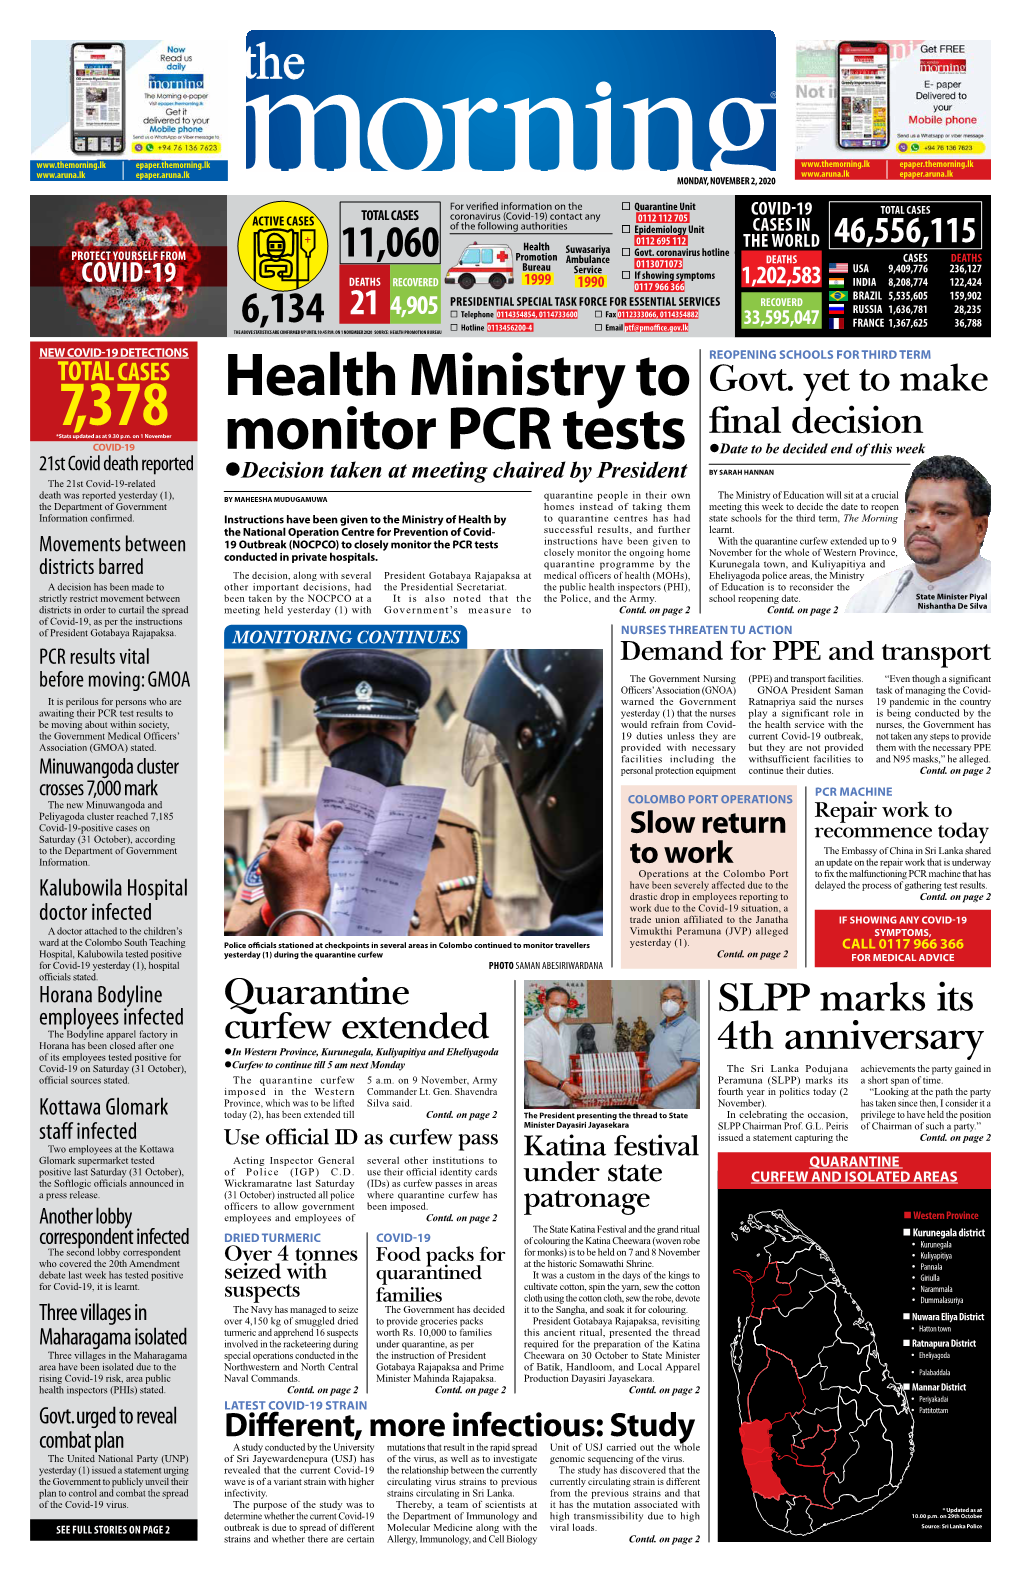 Health Ministry to Monitor PCR Tests